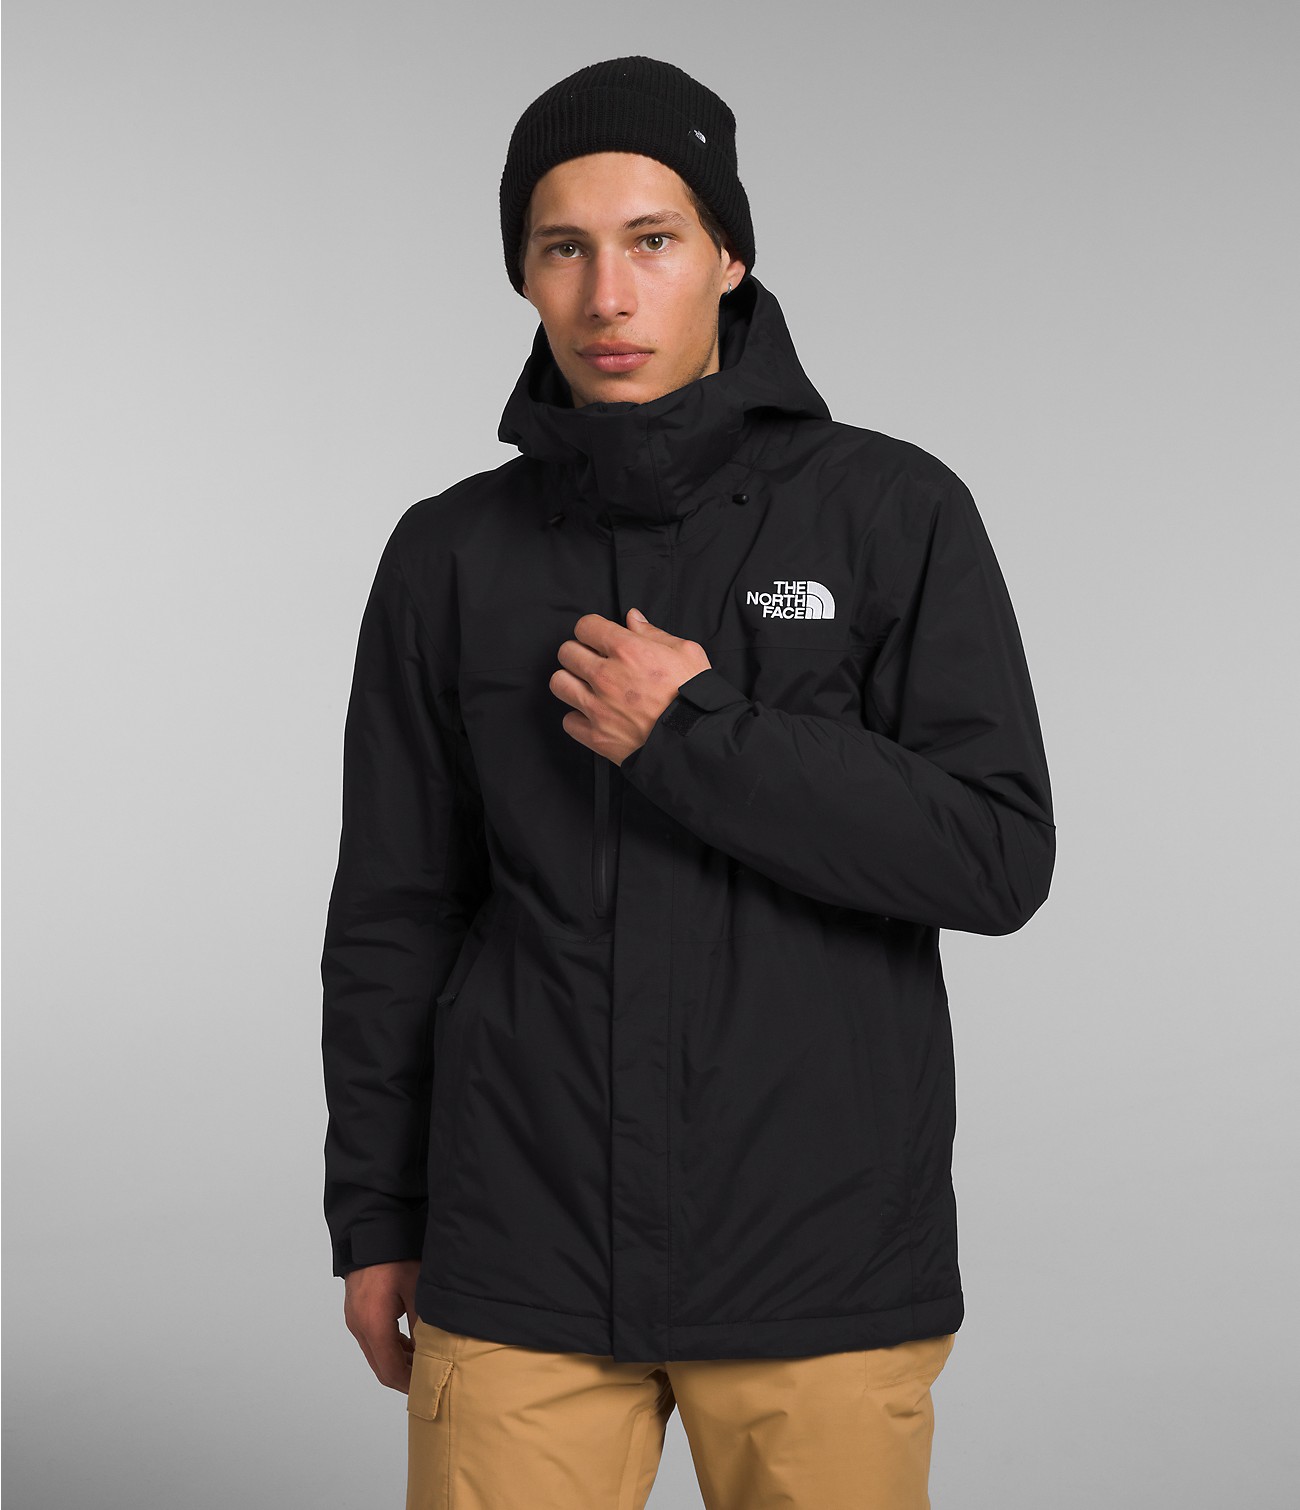 Unlock Wilderness' choice in the Oakley Vs North Face comparison, the Freedom Insulated Jacket by The North Face